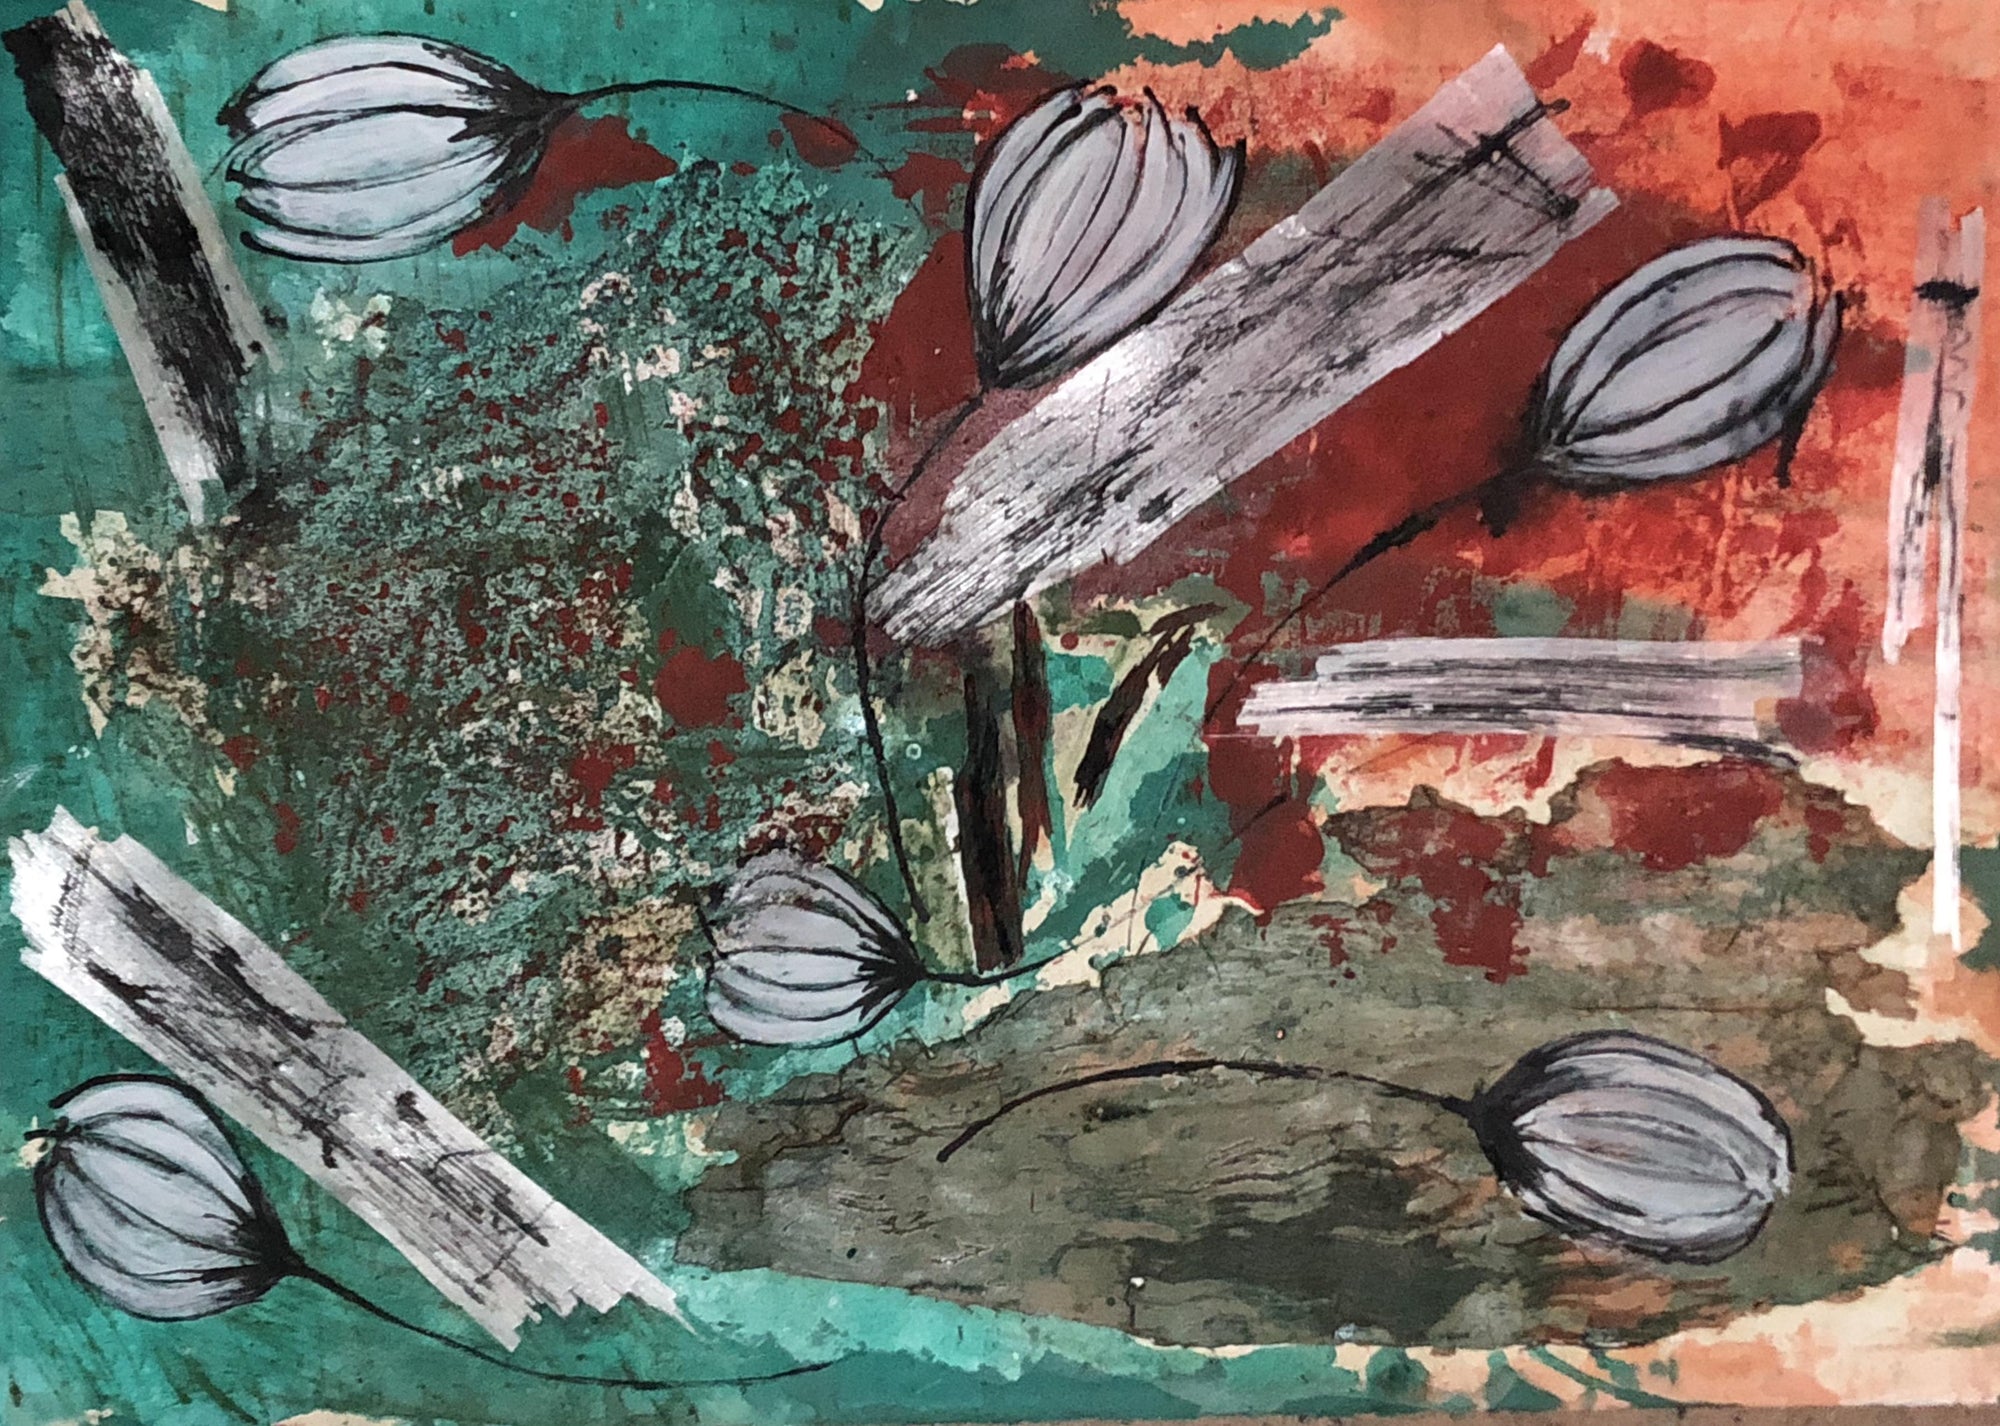 Pods I  2018 - Mixed Media on Canson - 600 x 420mm